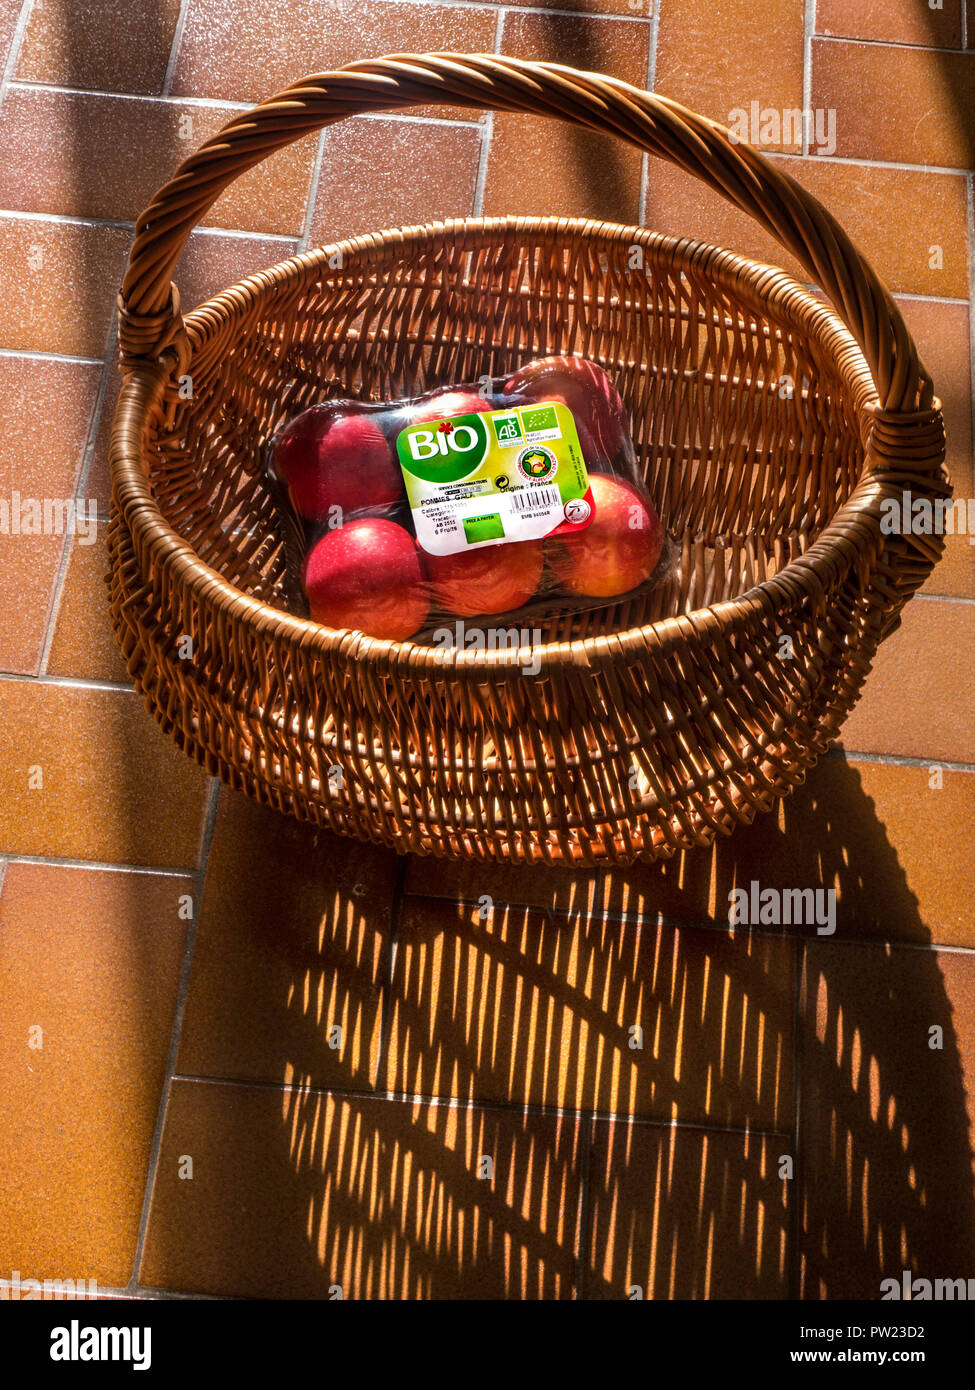 Biodynamic French Gala Apples in wicker shopping basket, in shaft of sunlight, as a concept for healthy organic life future fruit agriculture  France Stock Photo